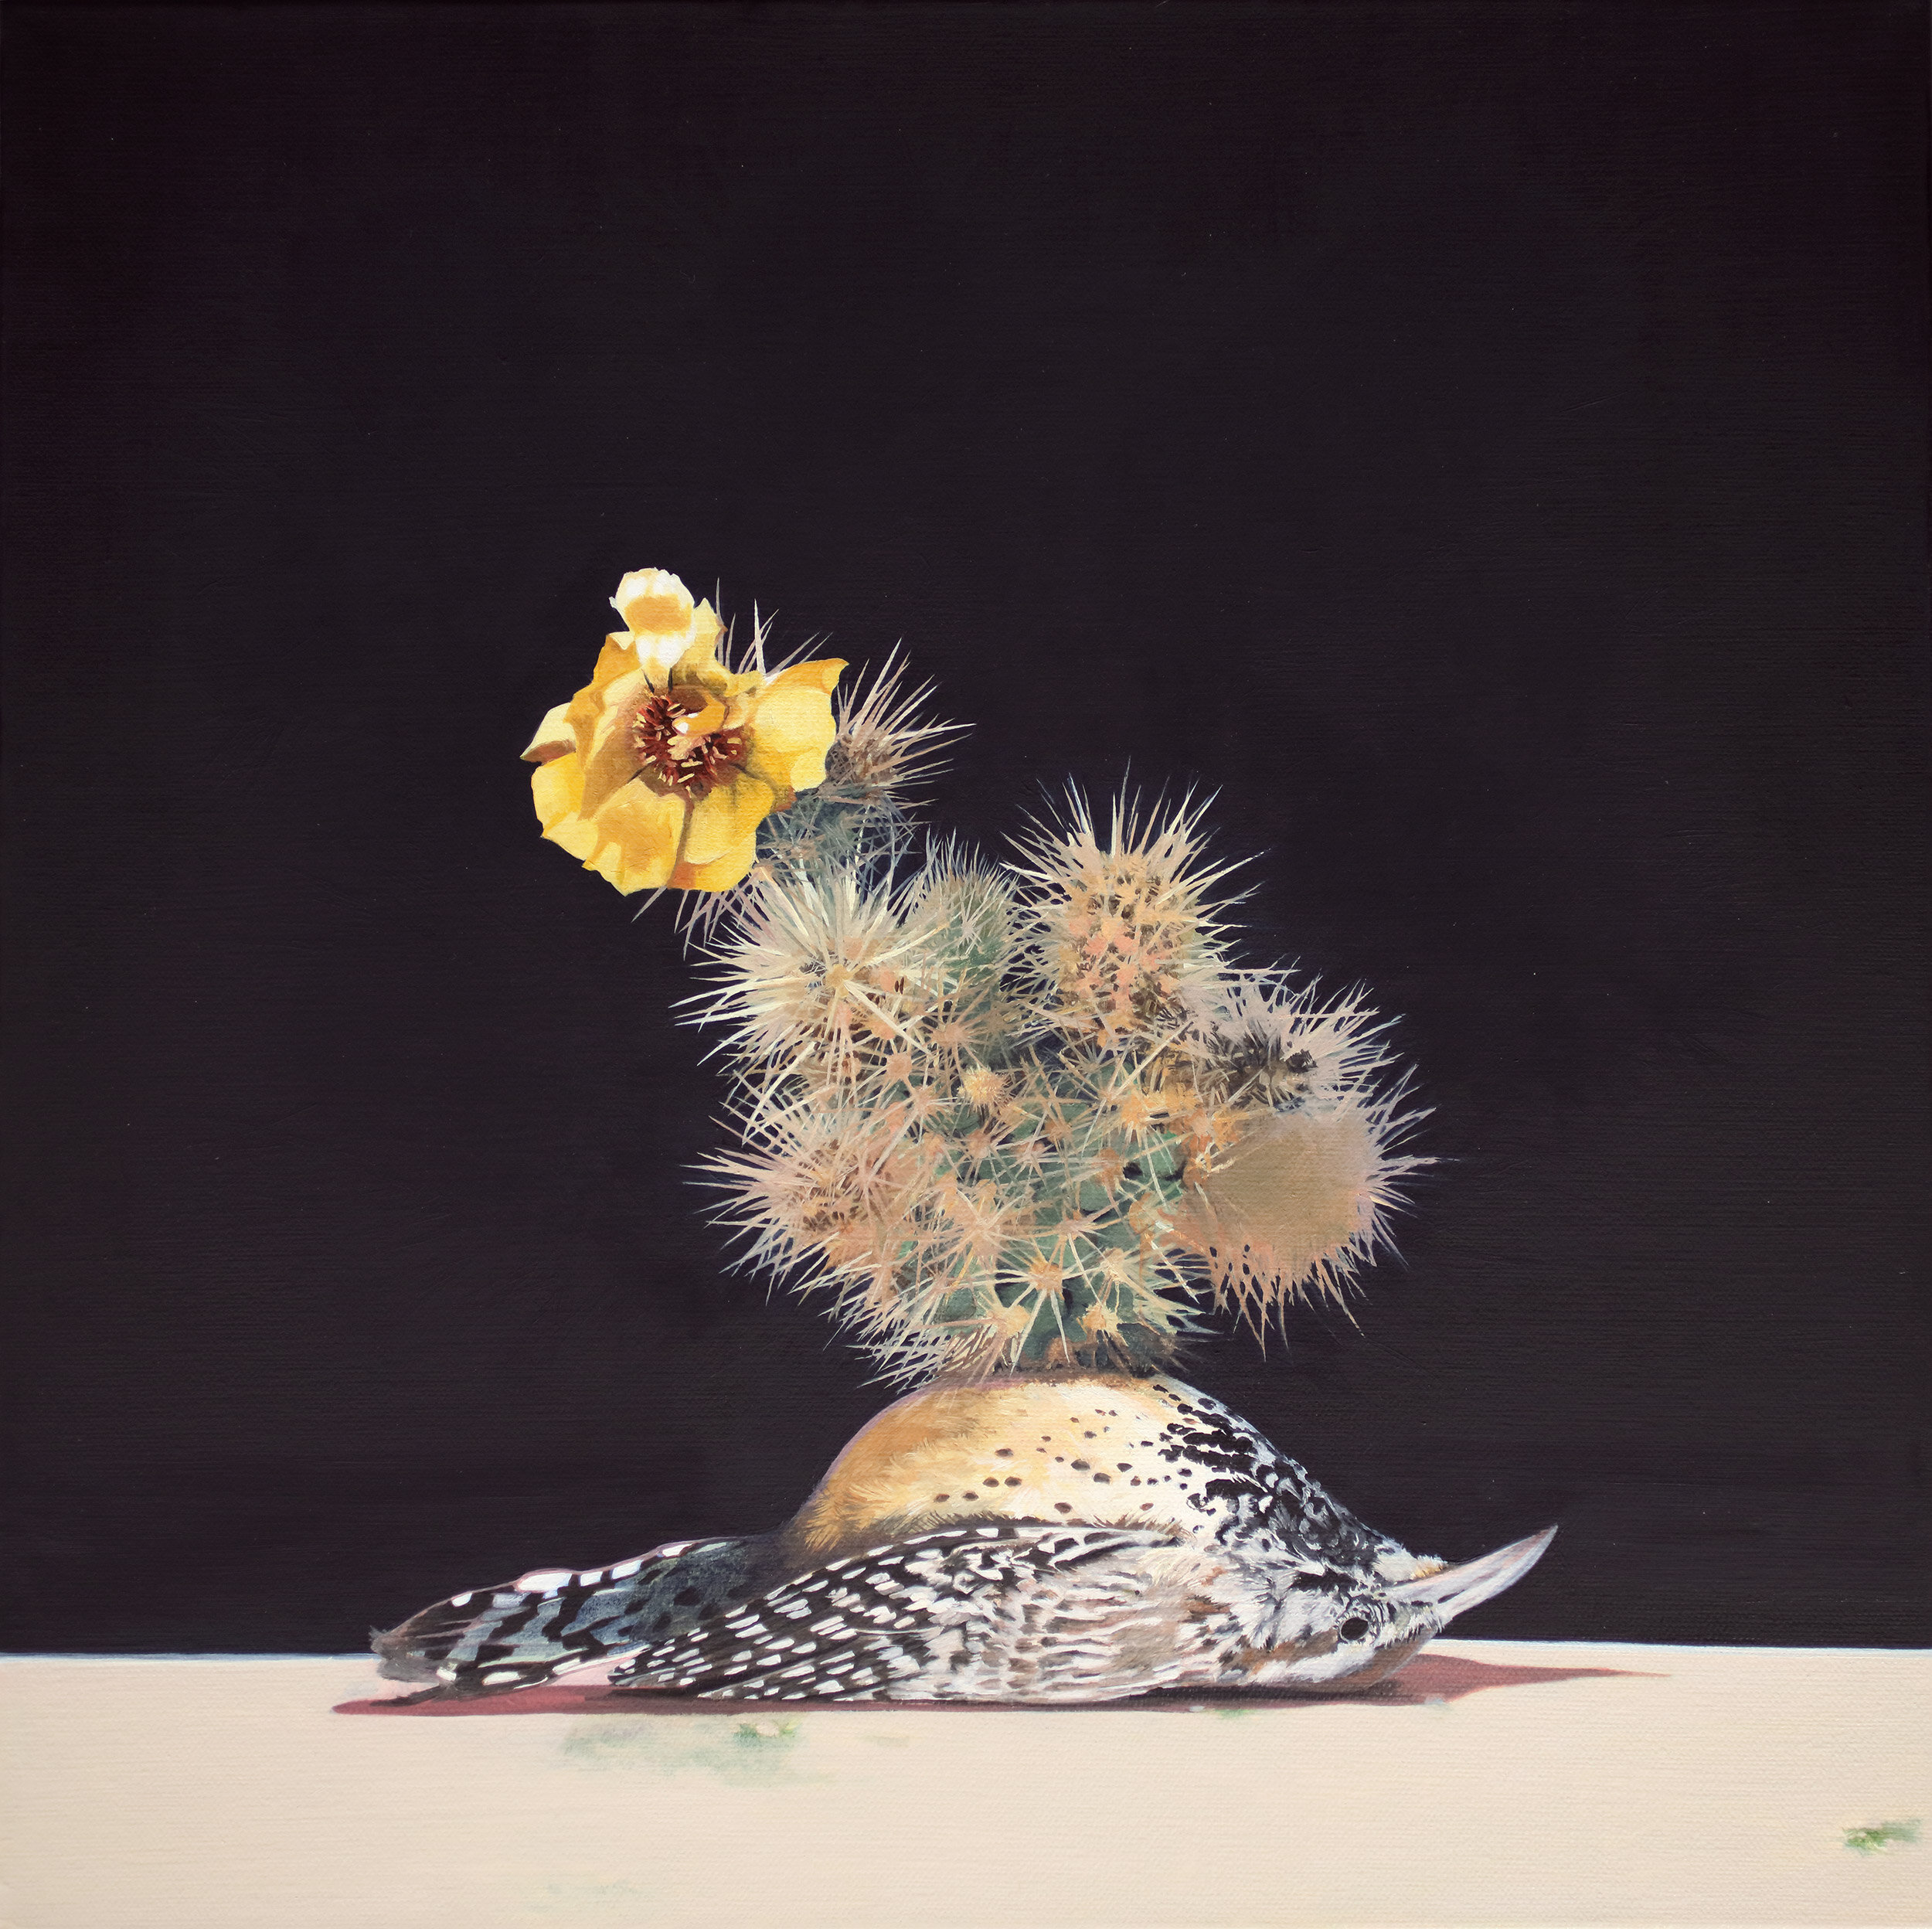   Grounded Cactus Wren  2019 Oil on canvas 18x18 inches 